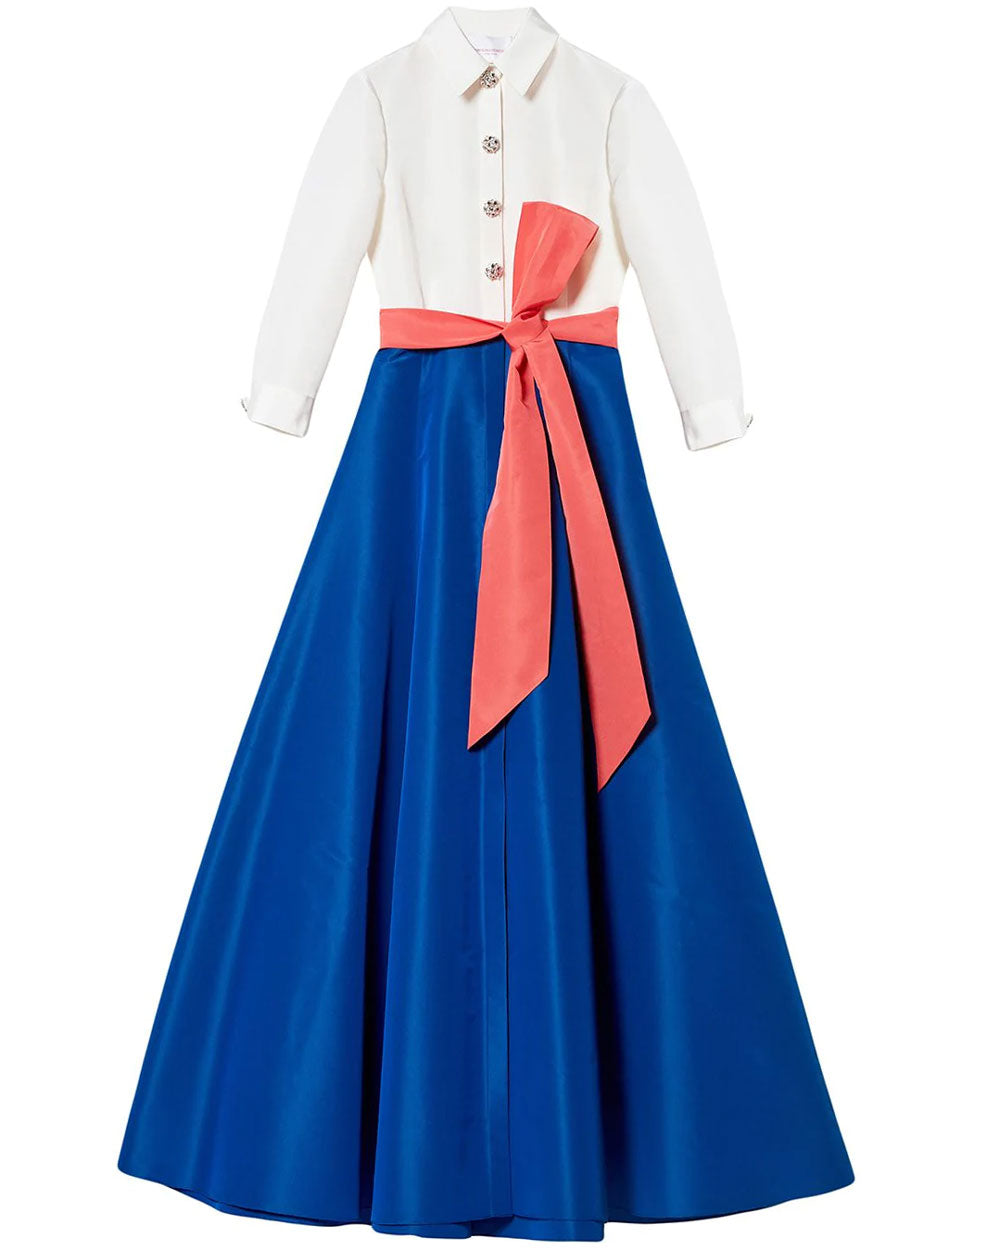 Bow Detail Shirt Gown in Cobalt and White